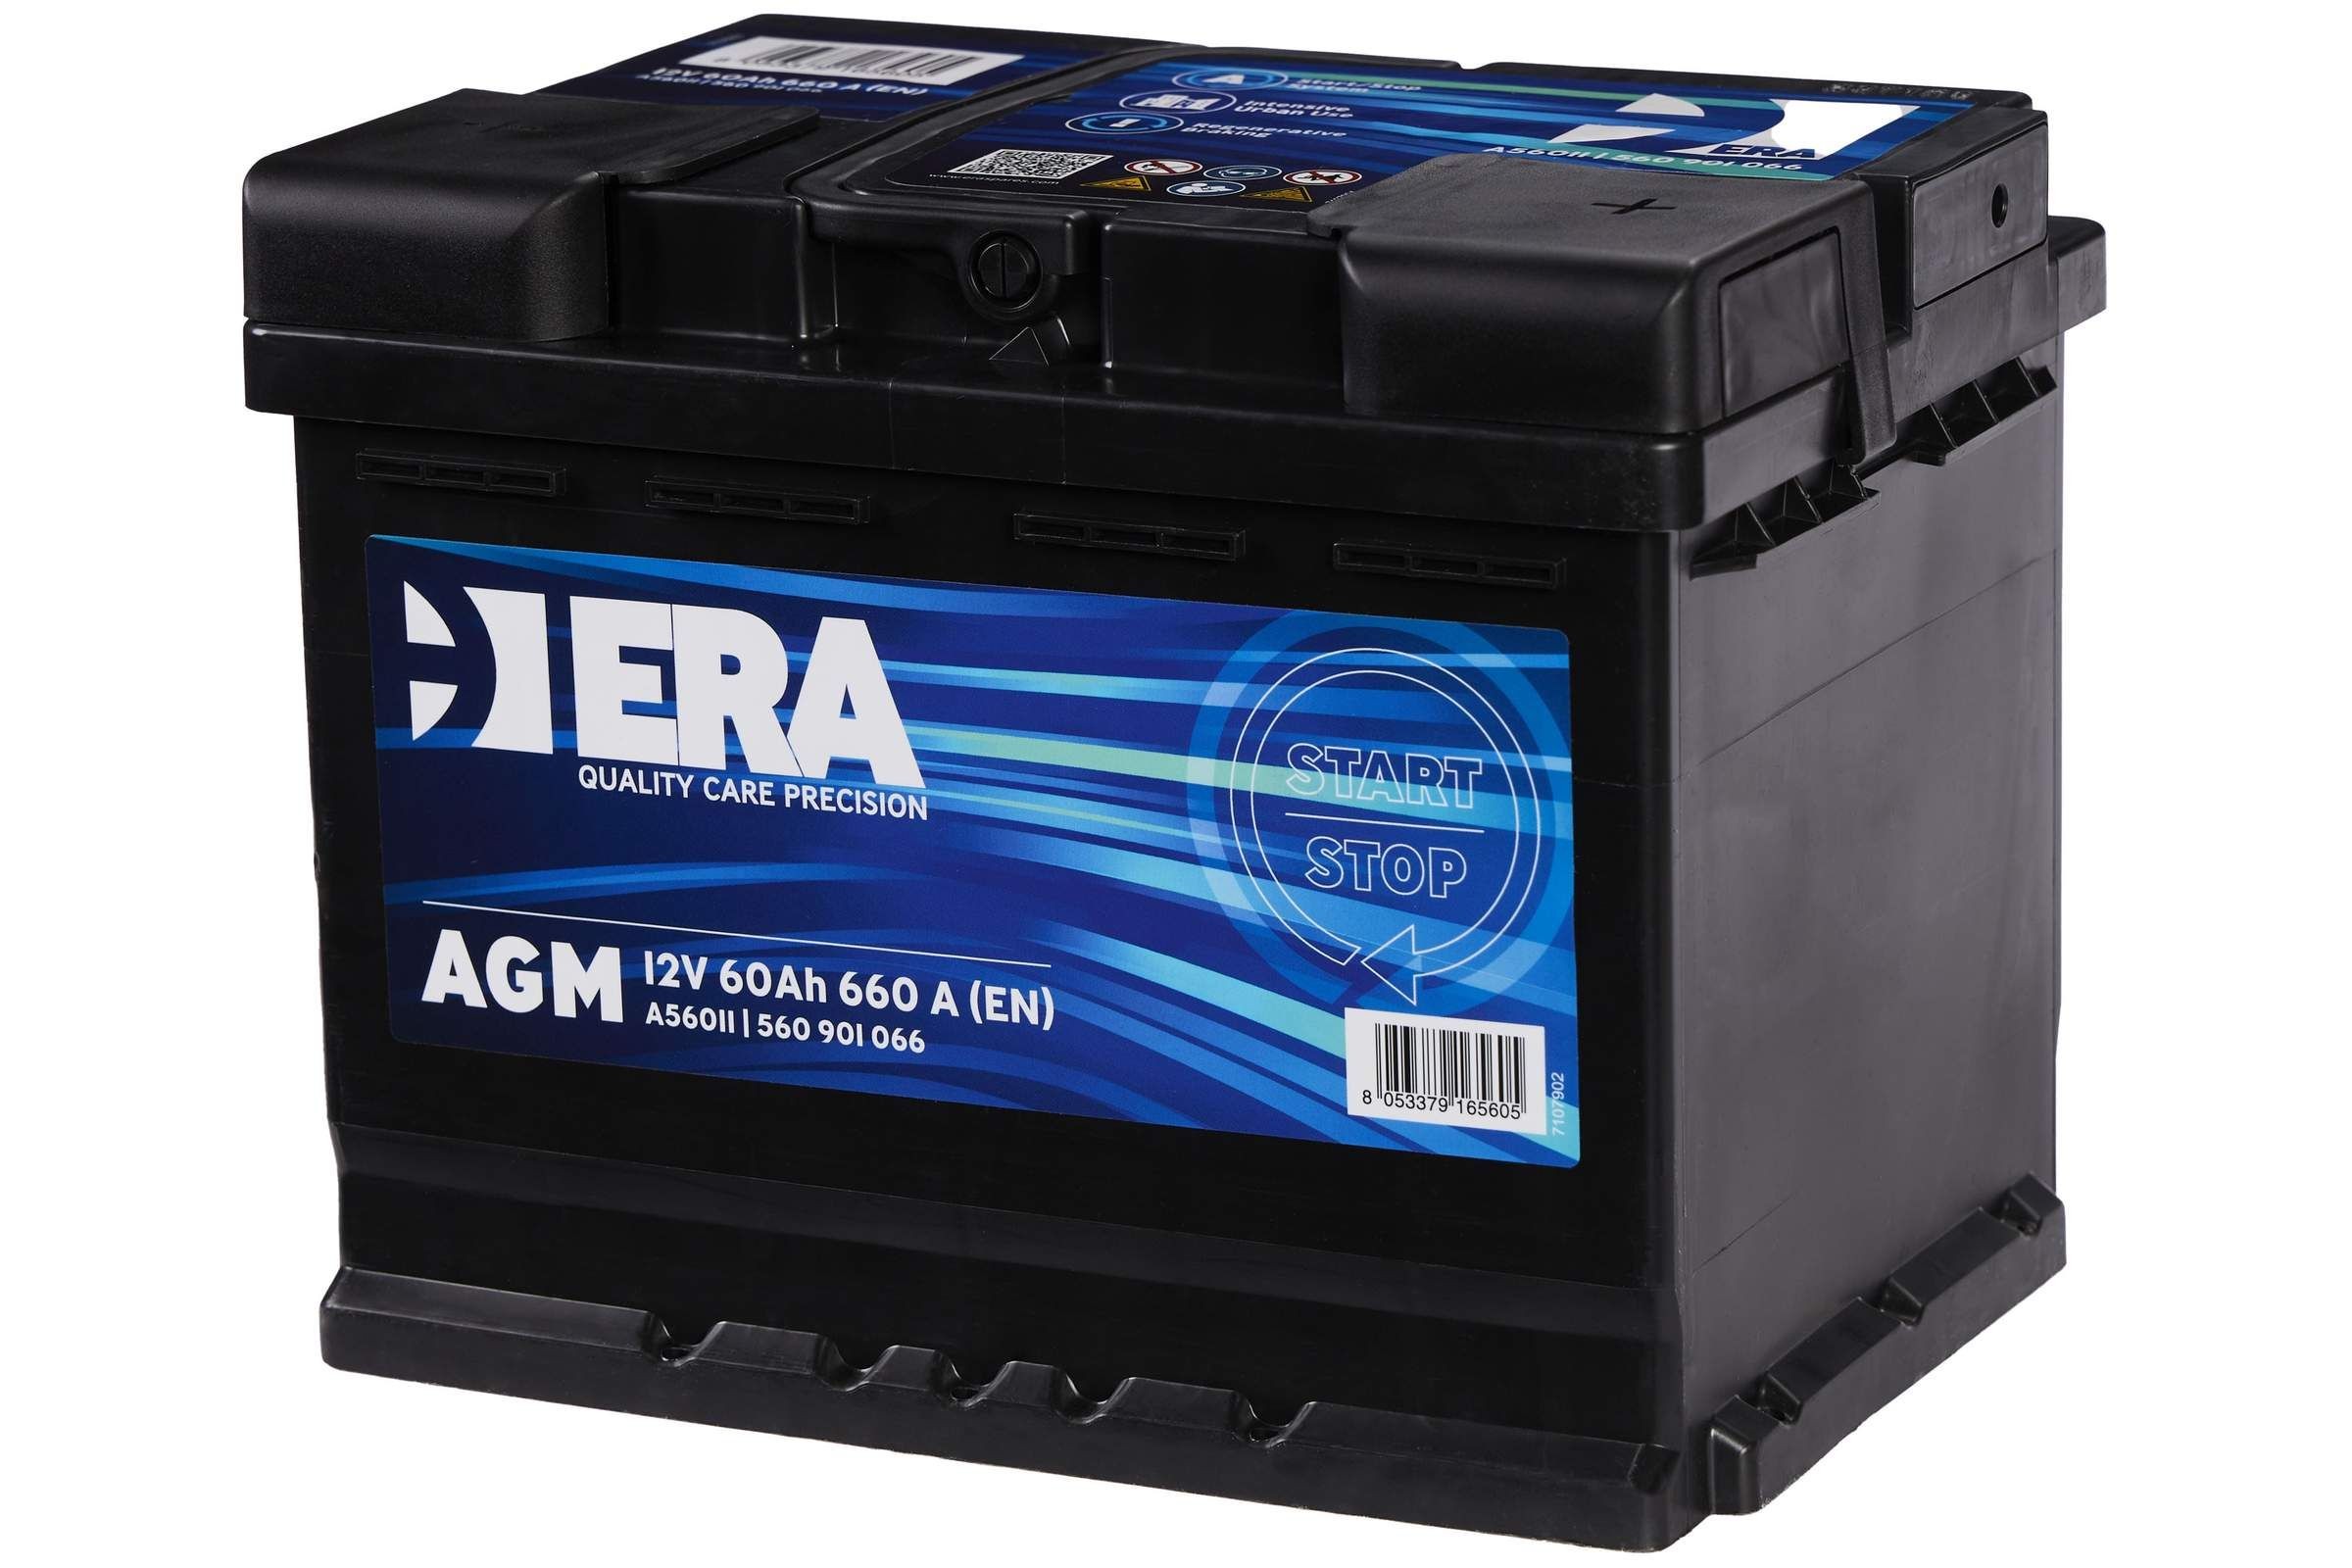 Original A56011 ERA Battery experience and price